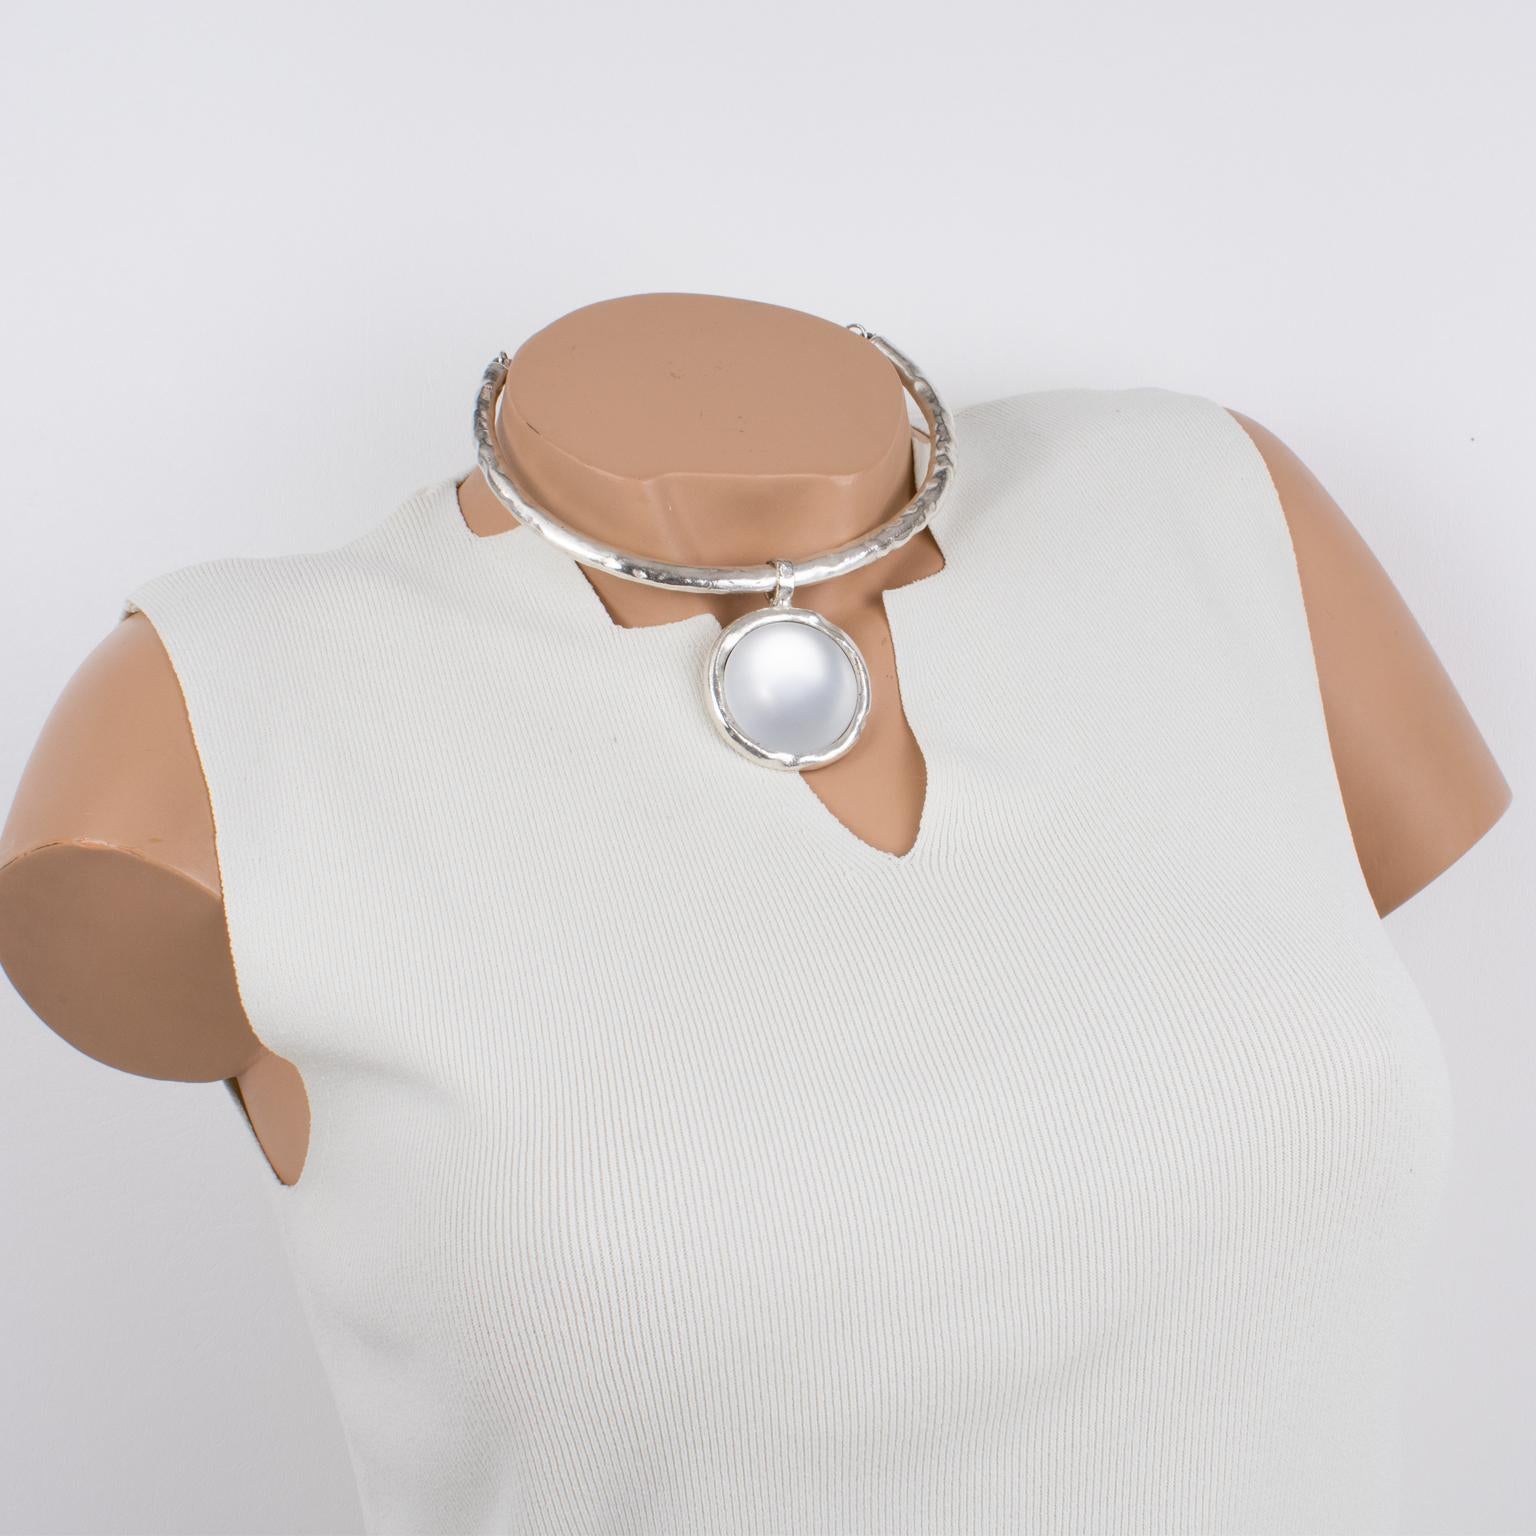 This fabulous modernist silvered metal choker necklace by Nelly Biche de Bere, Paris, features a rigid around-the-neck band with a hand-made feel design complimented with a round pendant. The pendant is ornate with a massive arctic white resin